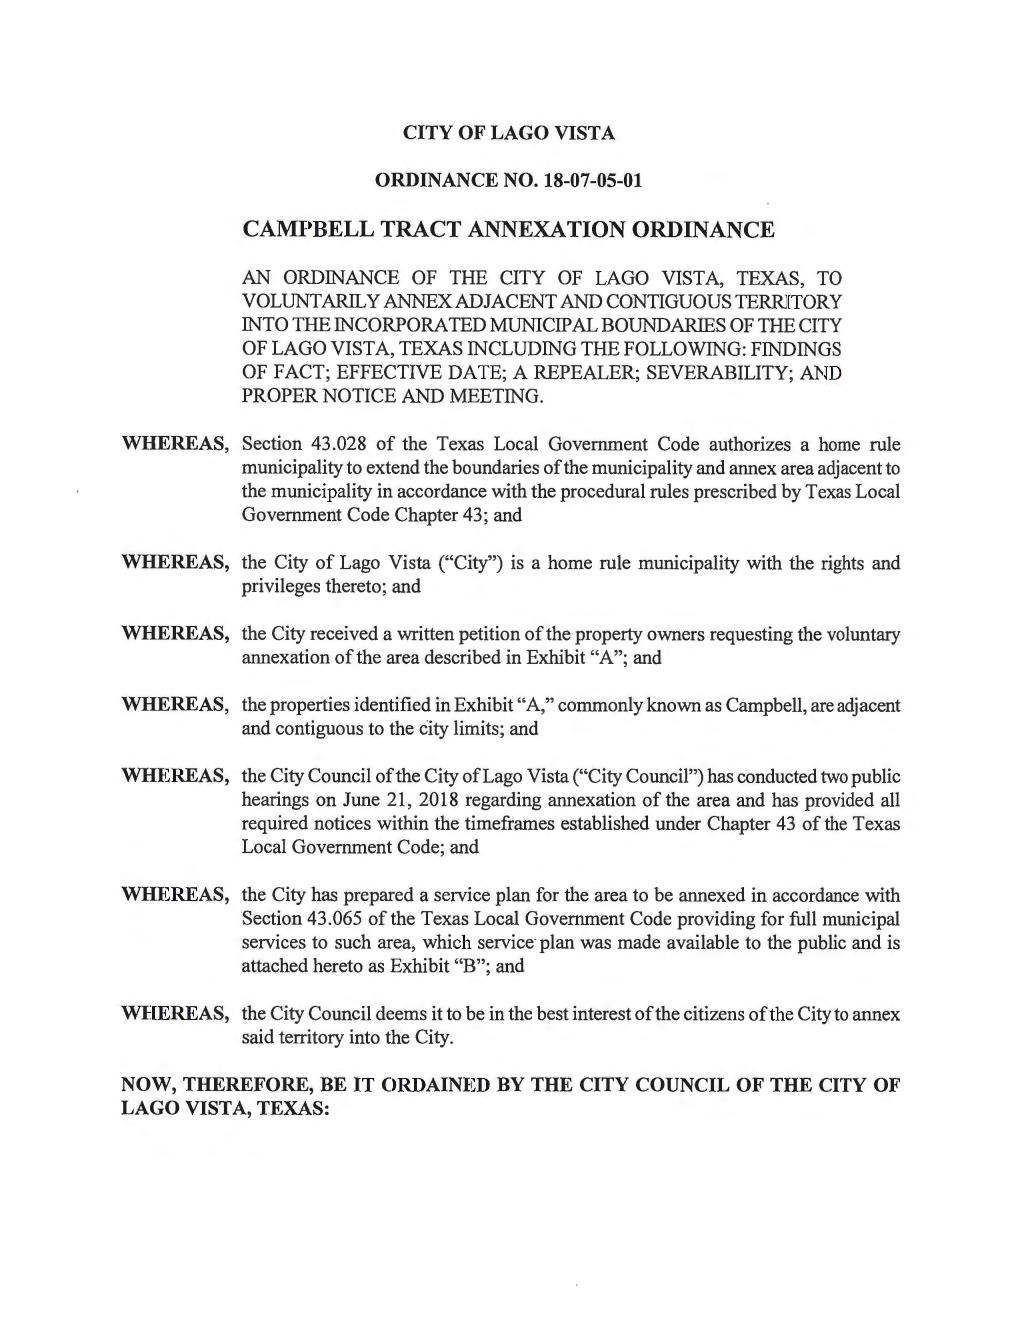 Campbell Tract Annexation Ordinance